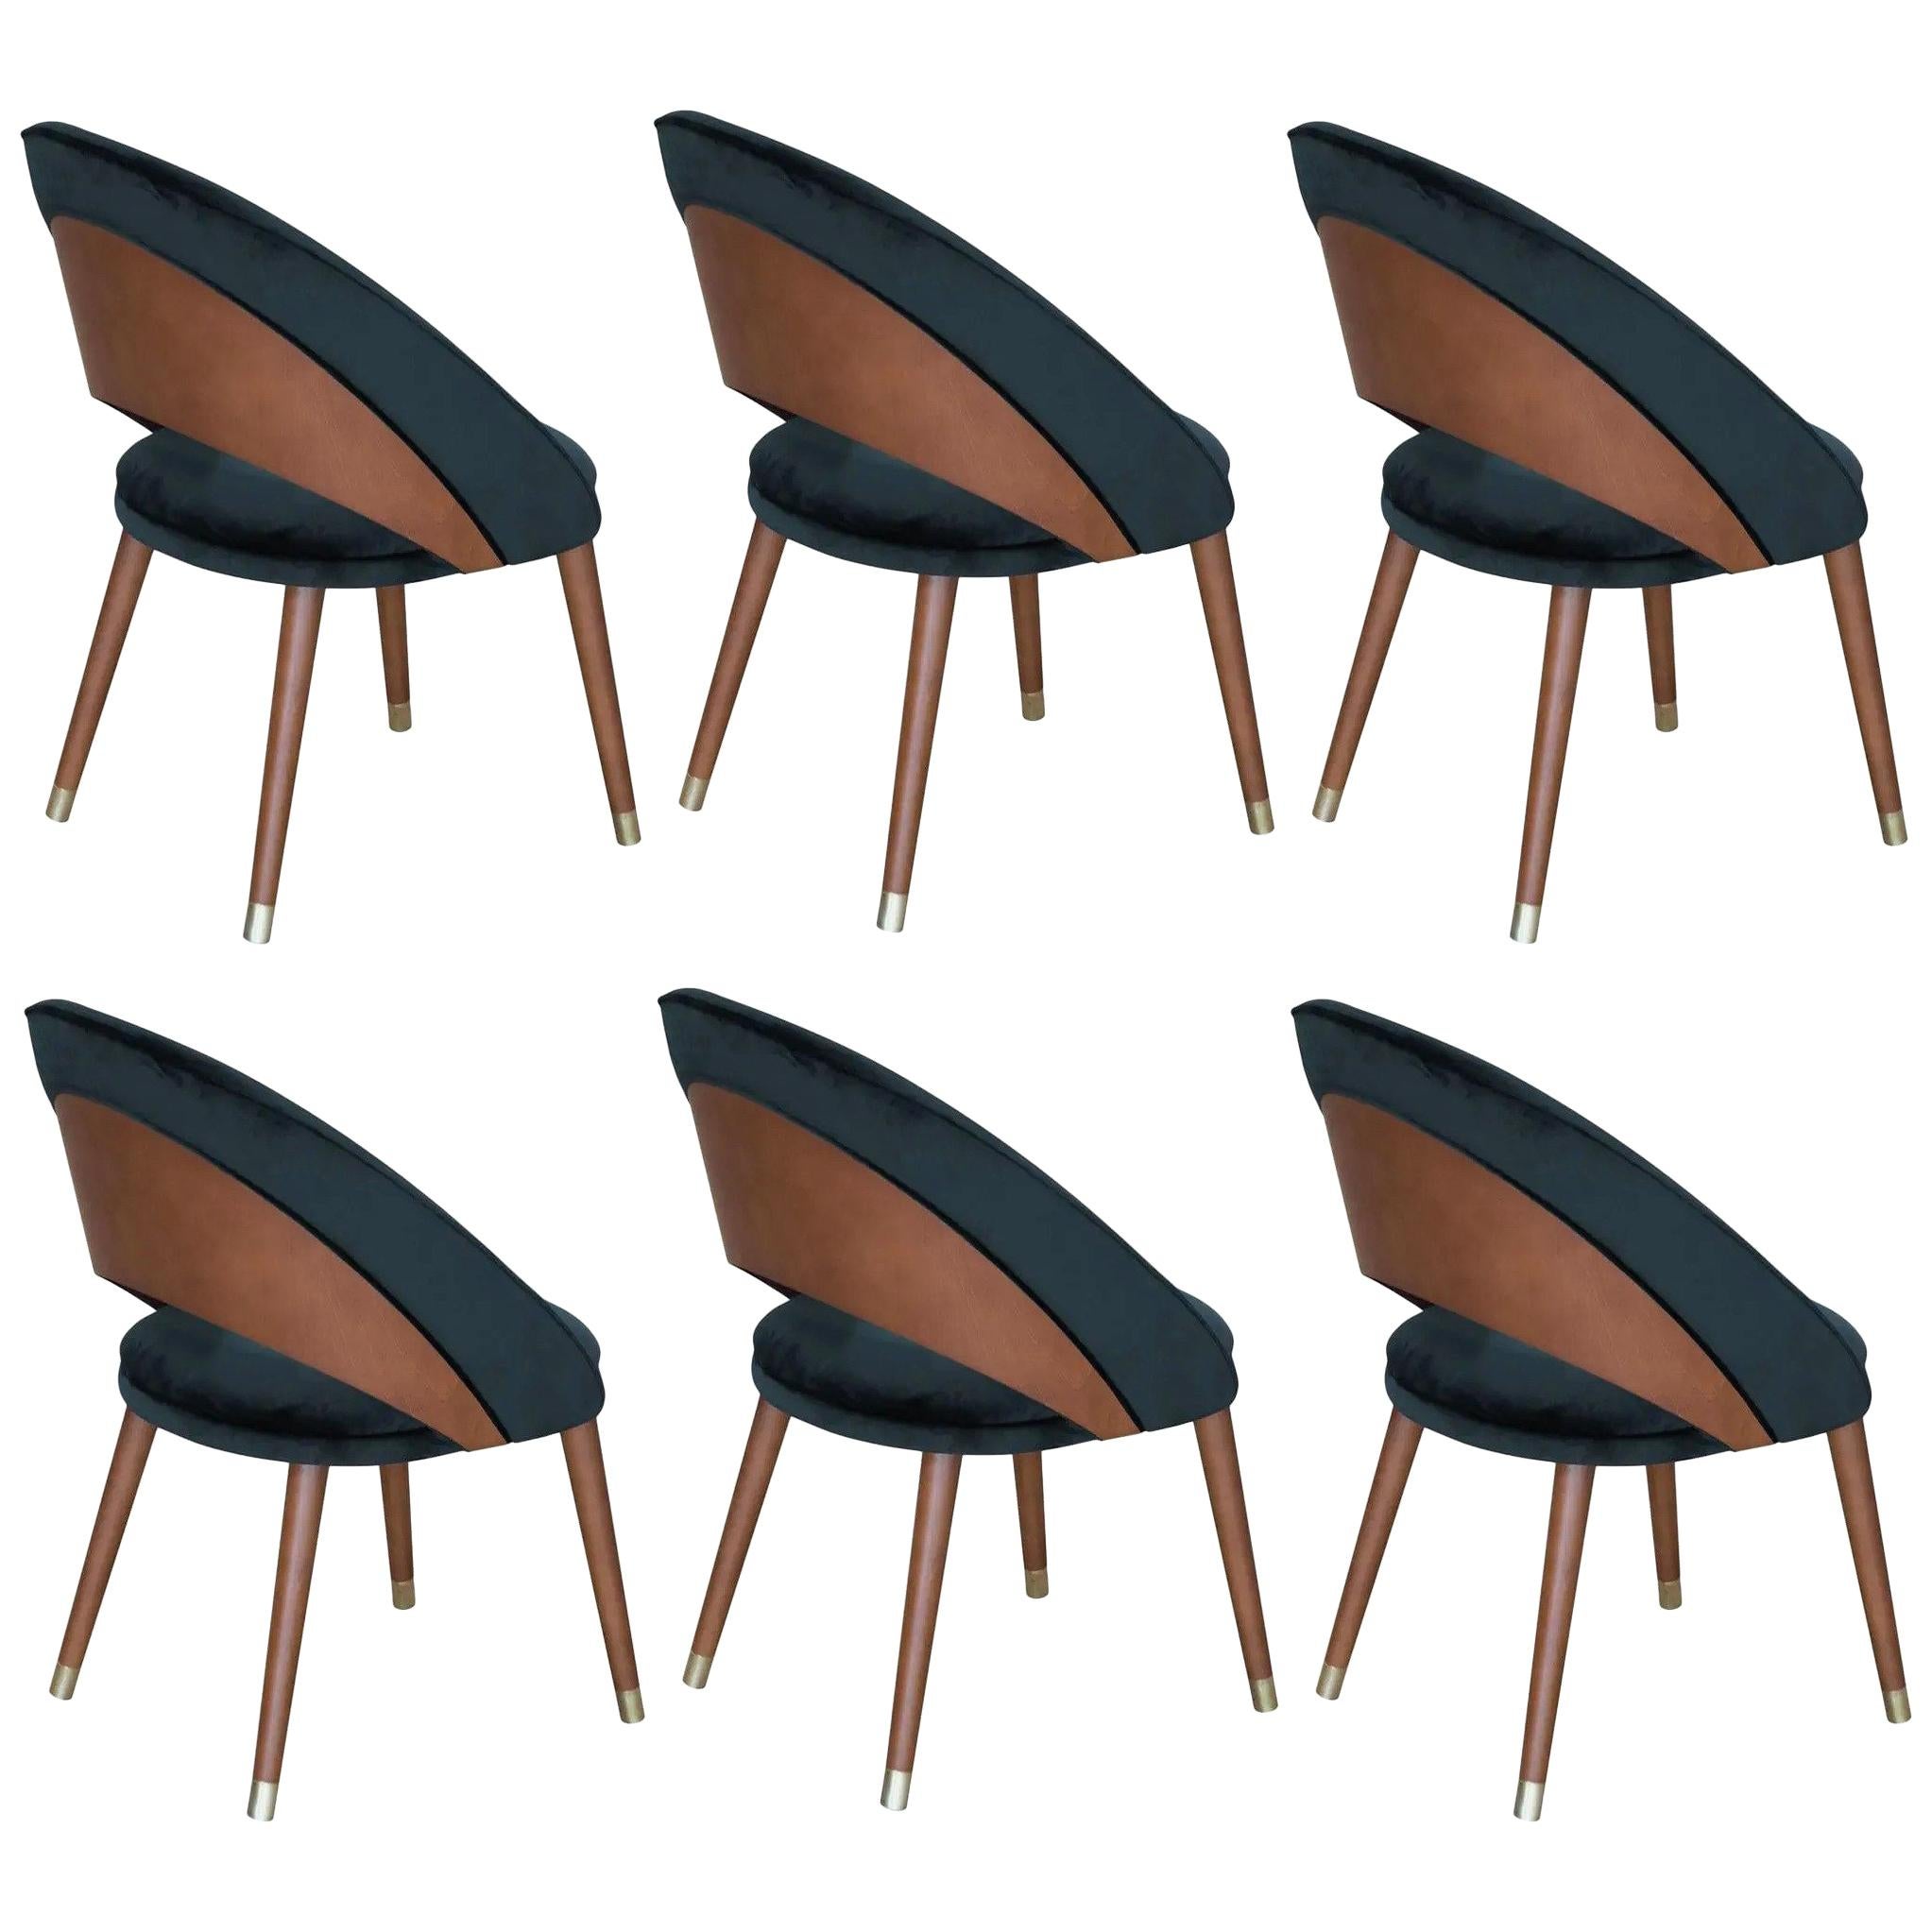 Mid-Century Modern Style Dining Chairs, Set of 6